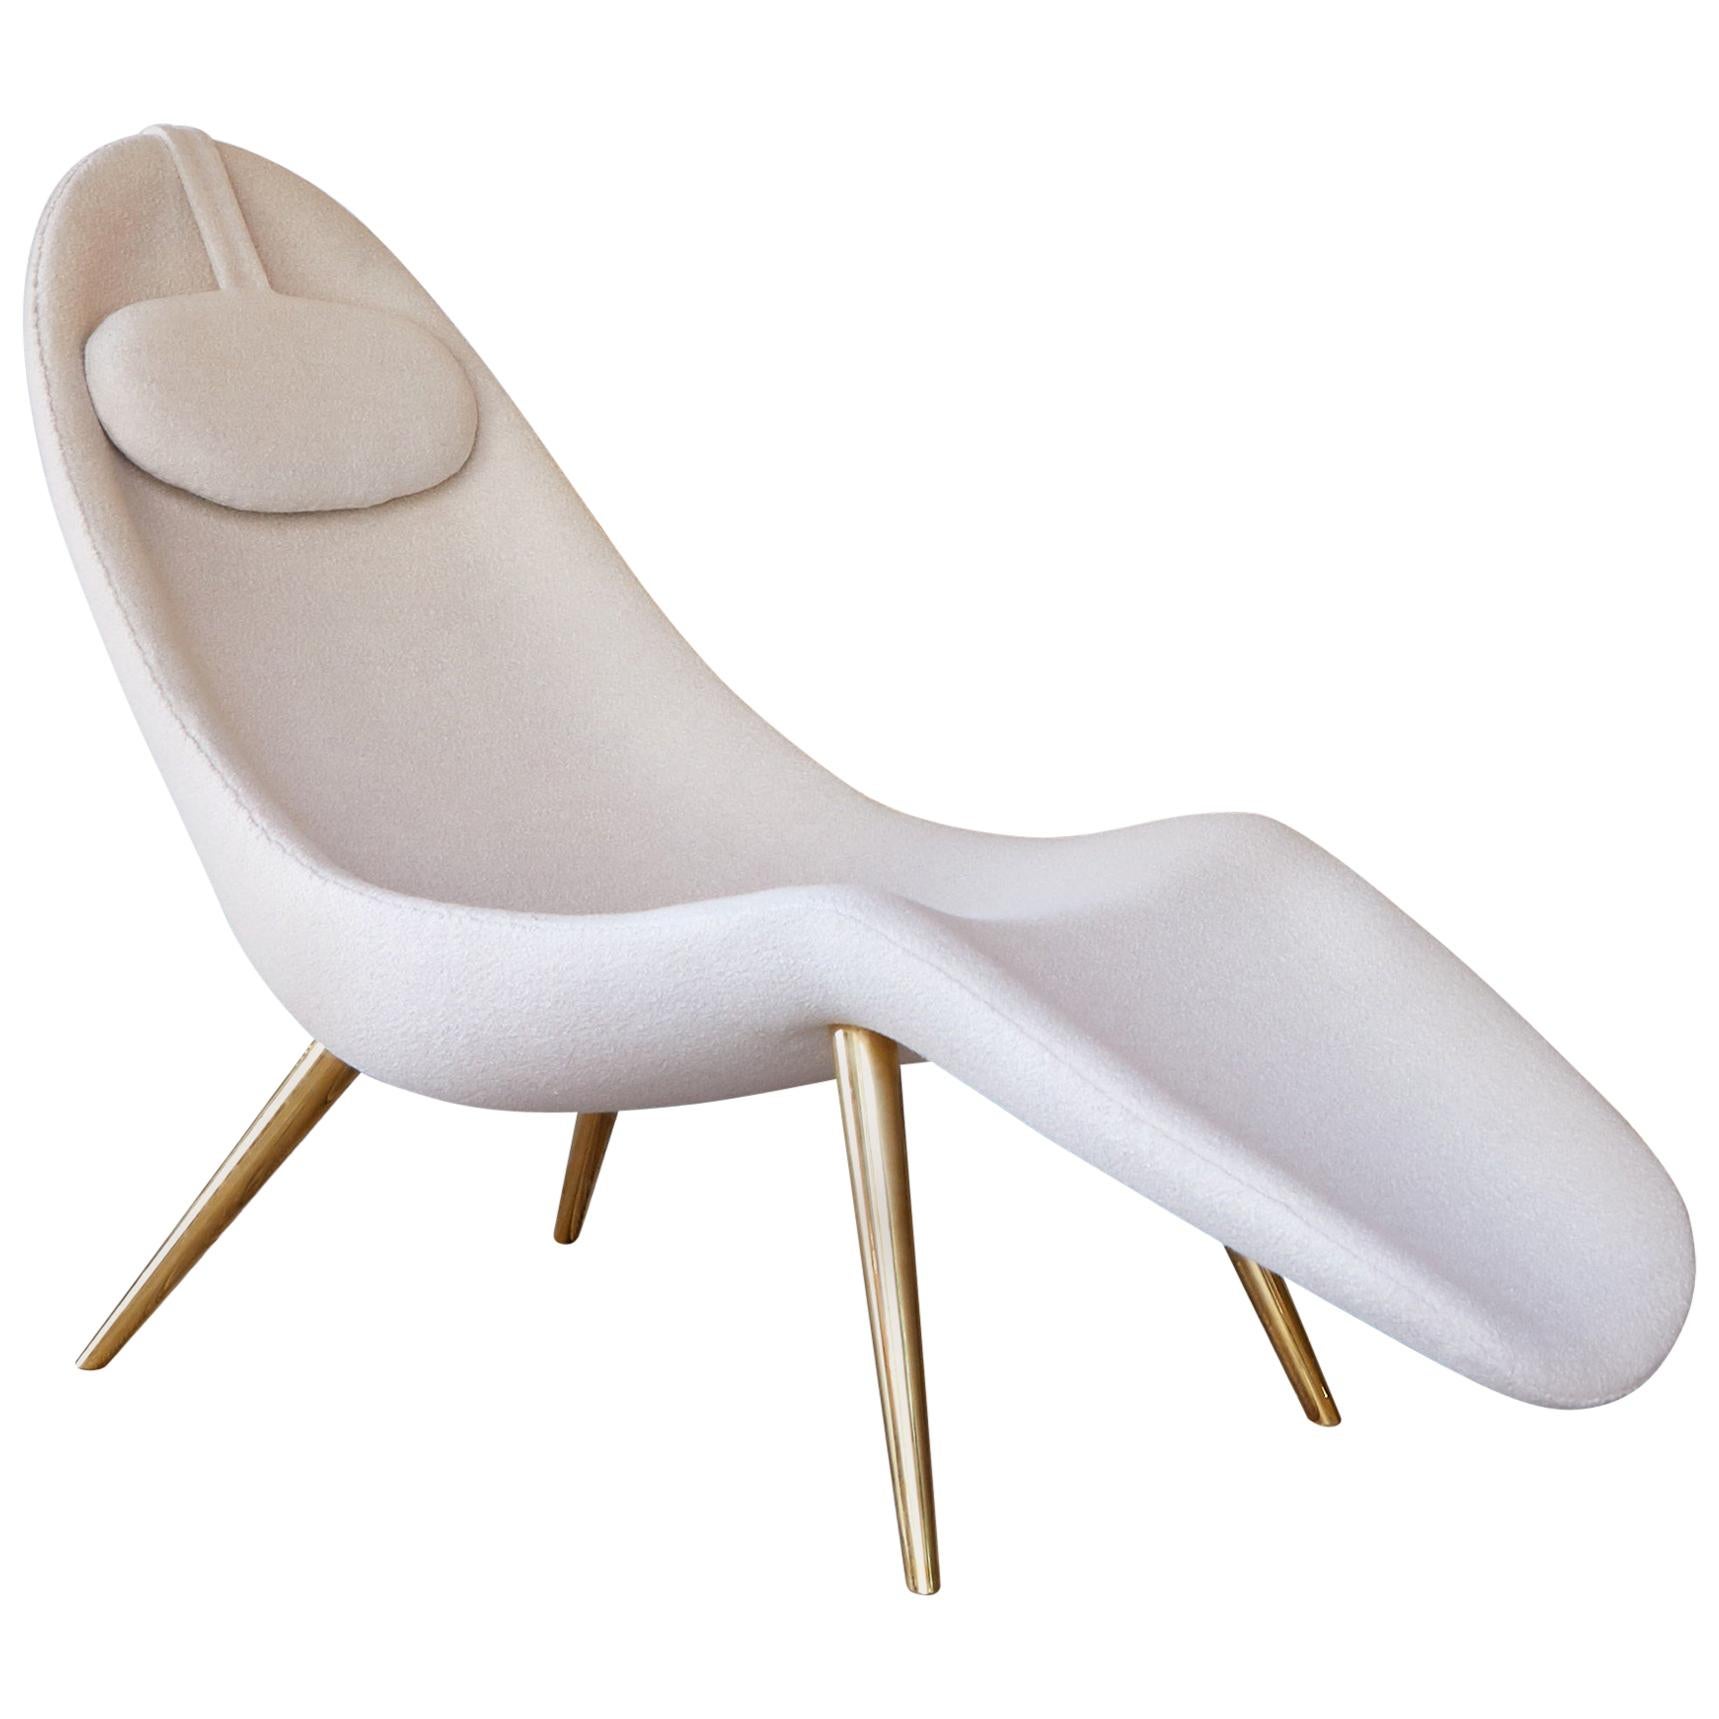 Konekt Pause Chaise Longue with Brass Legs and Wool Boucle